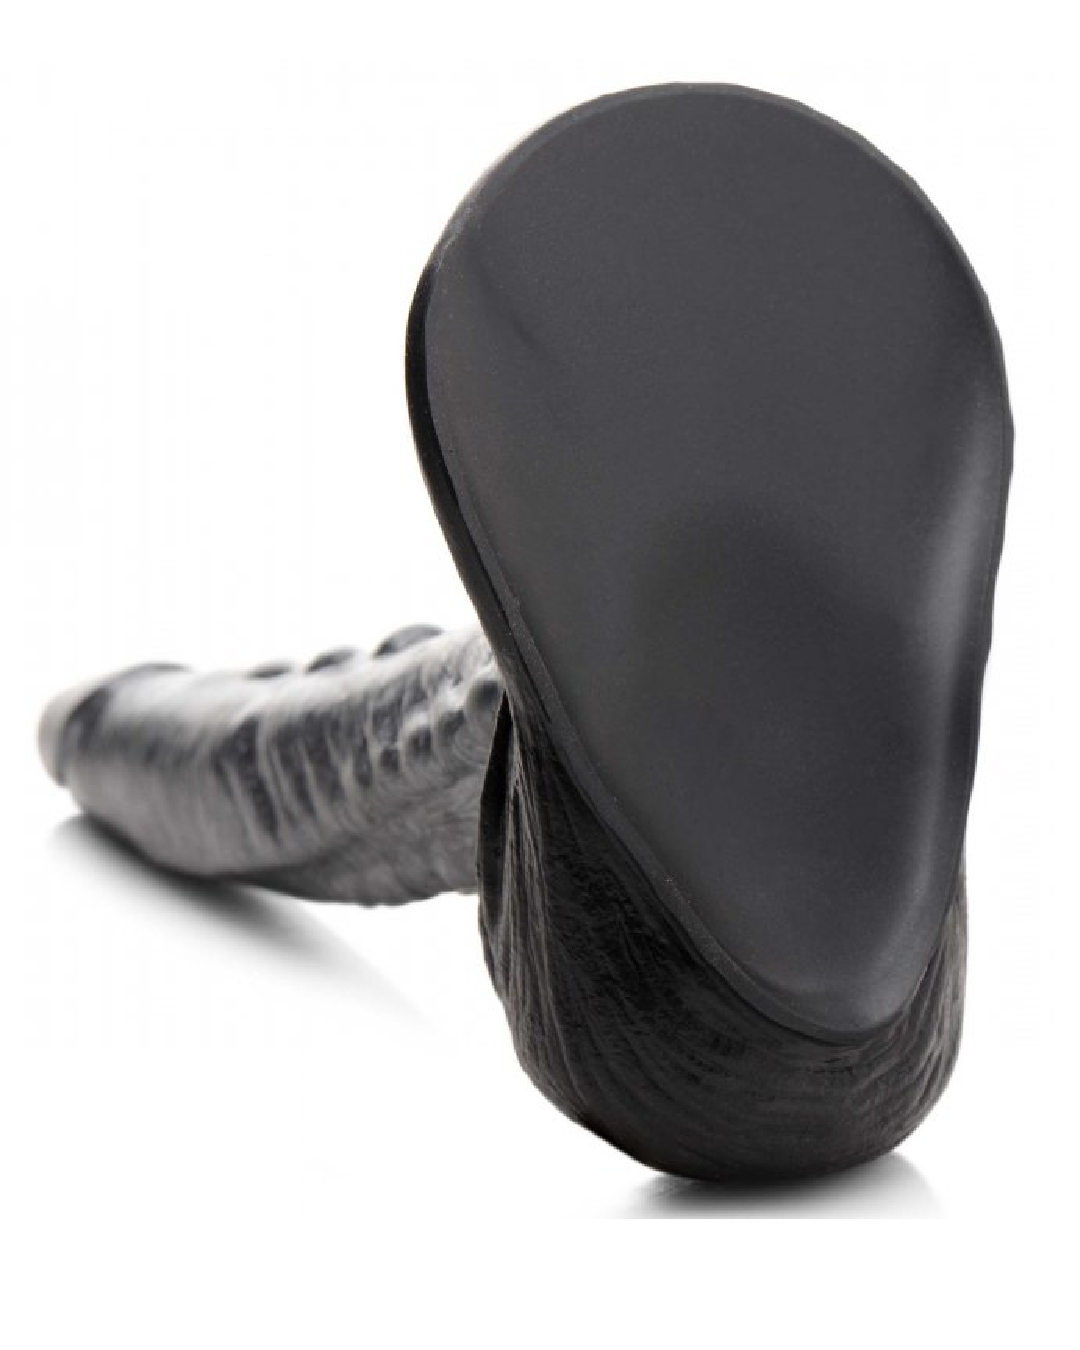 The Gargoyle Rock Hard 9 Inch Silicone Fantasy Dildo view of suction cup